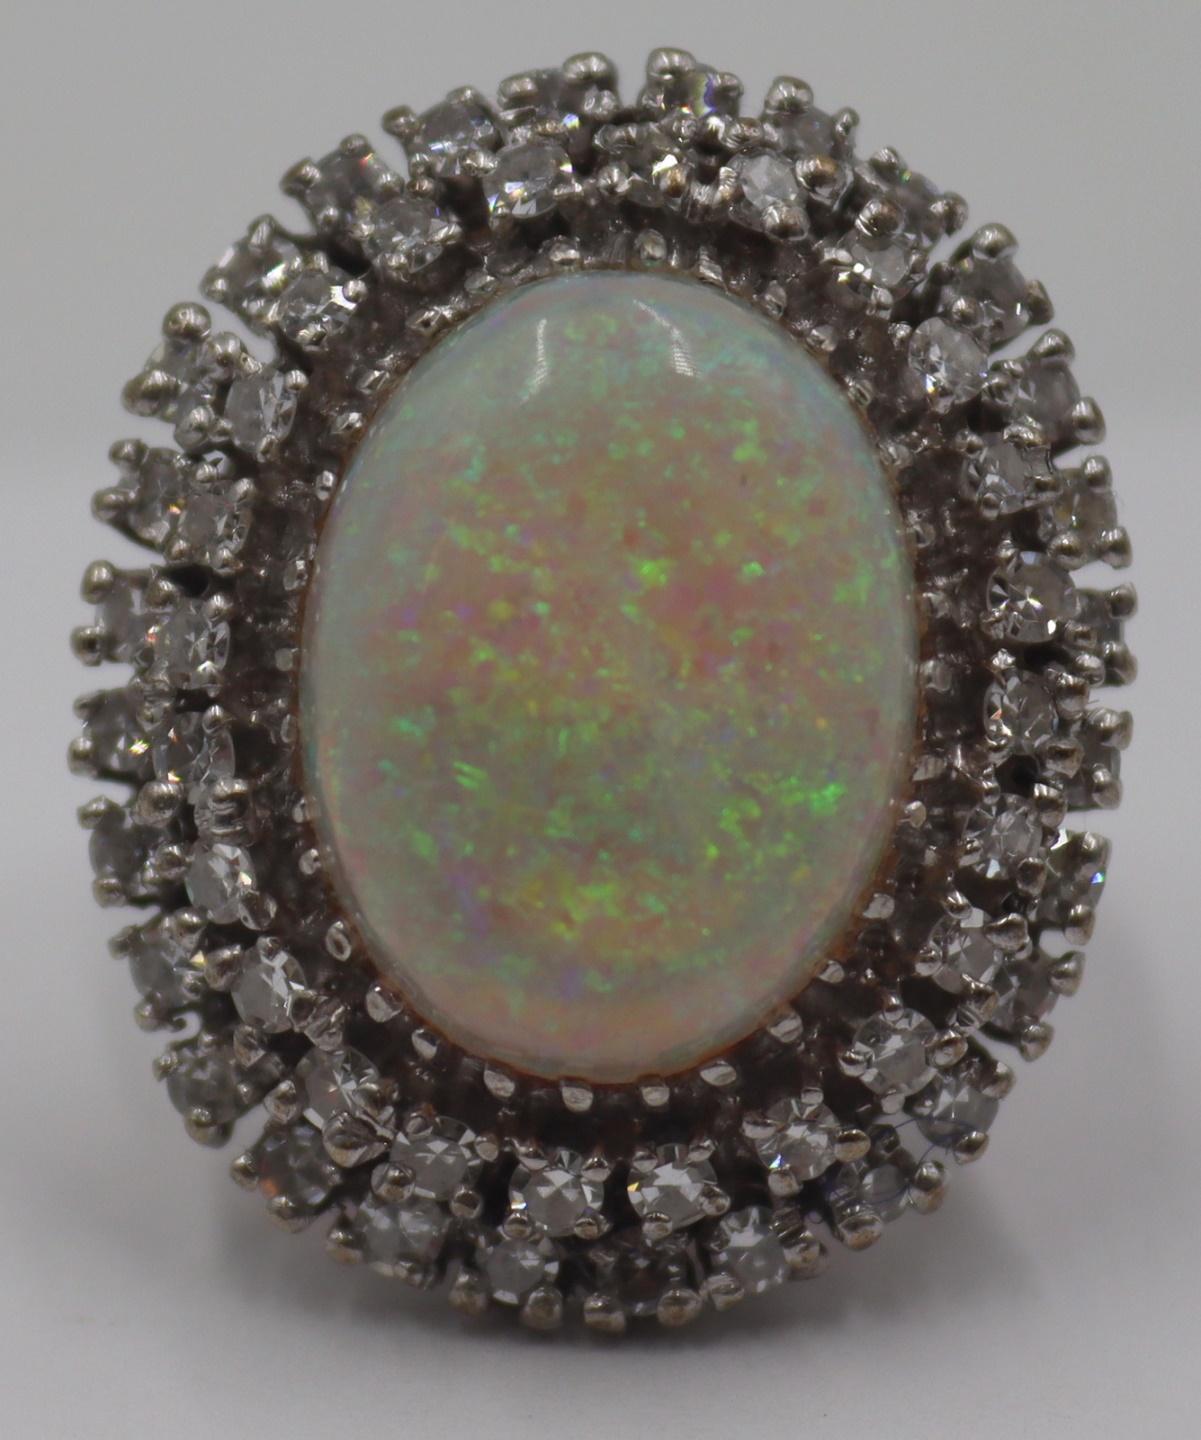 JEWELRY. 14KT GOLD OPAL AND DIAMOND